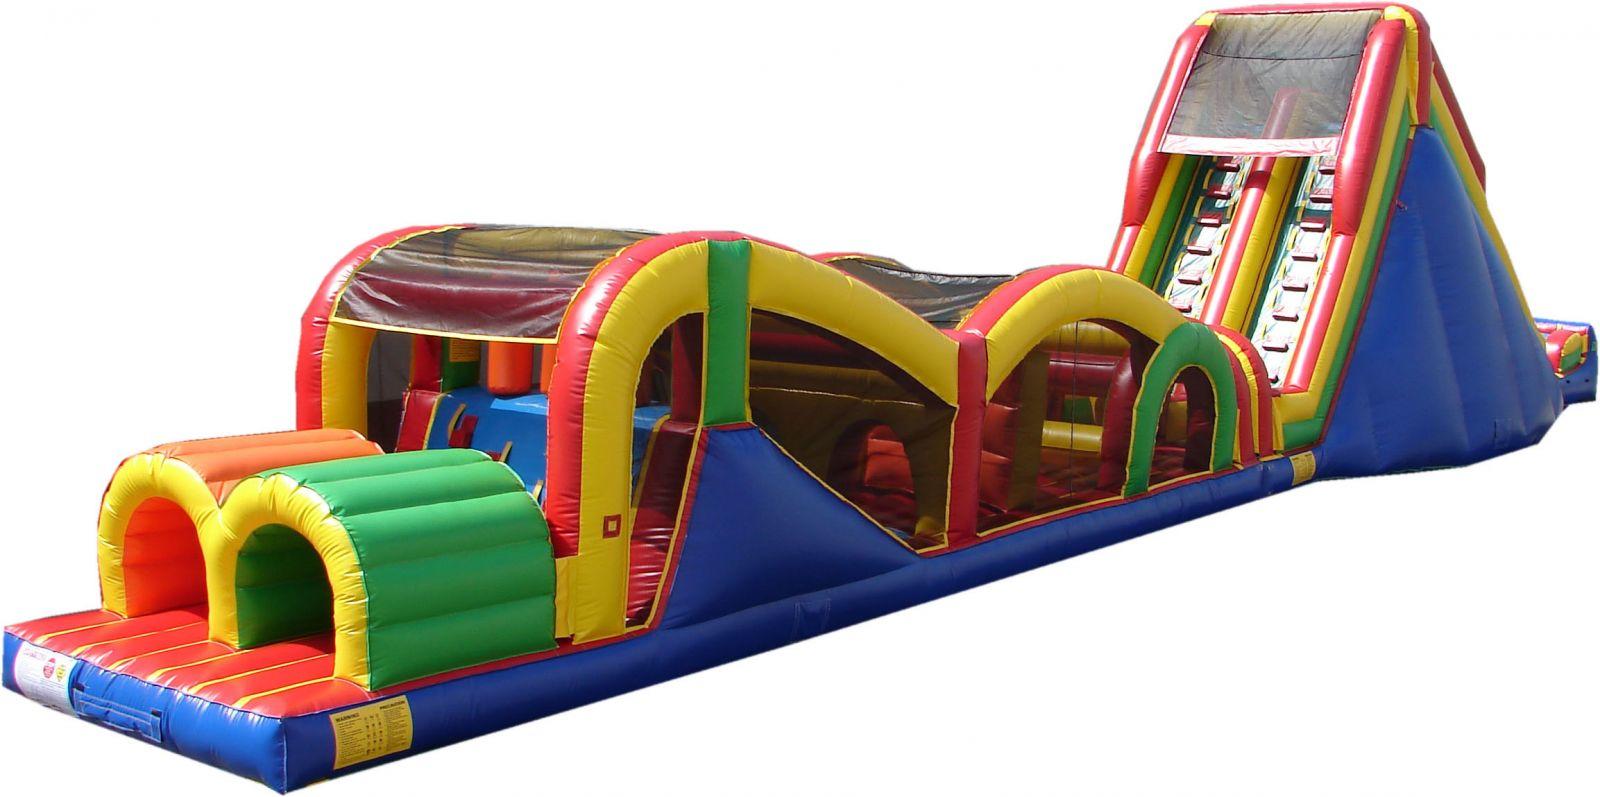 Inflatable Obstacle Course Rental in River Grove